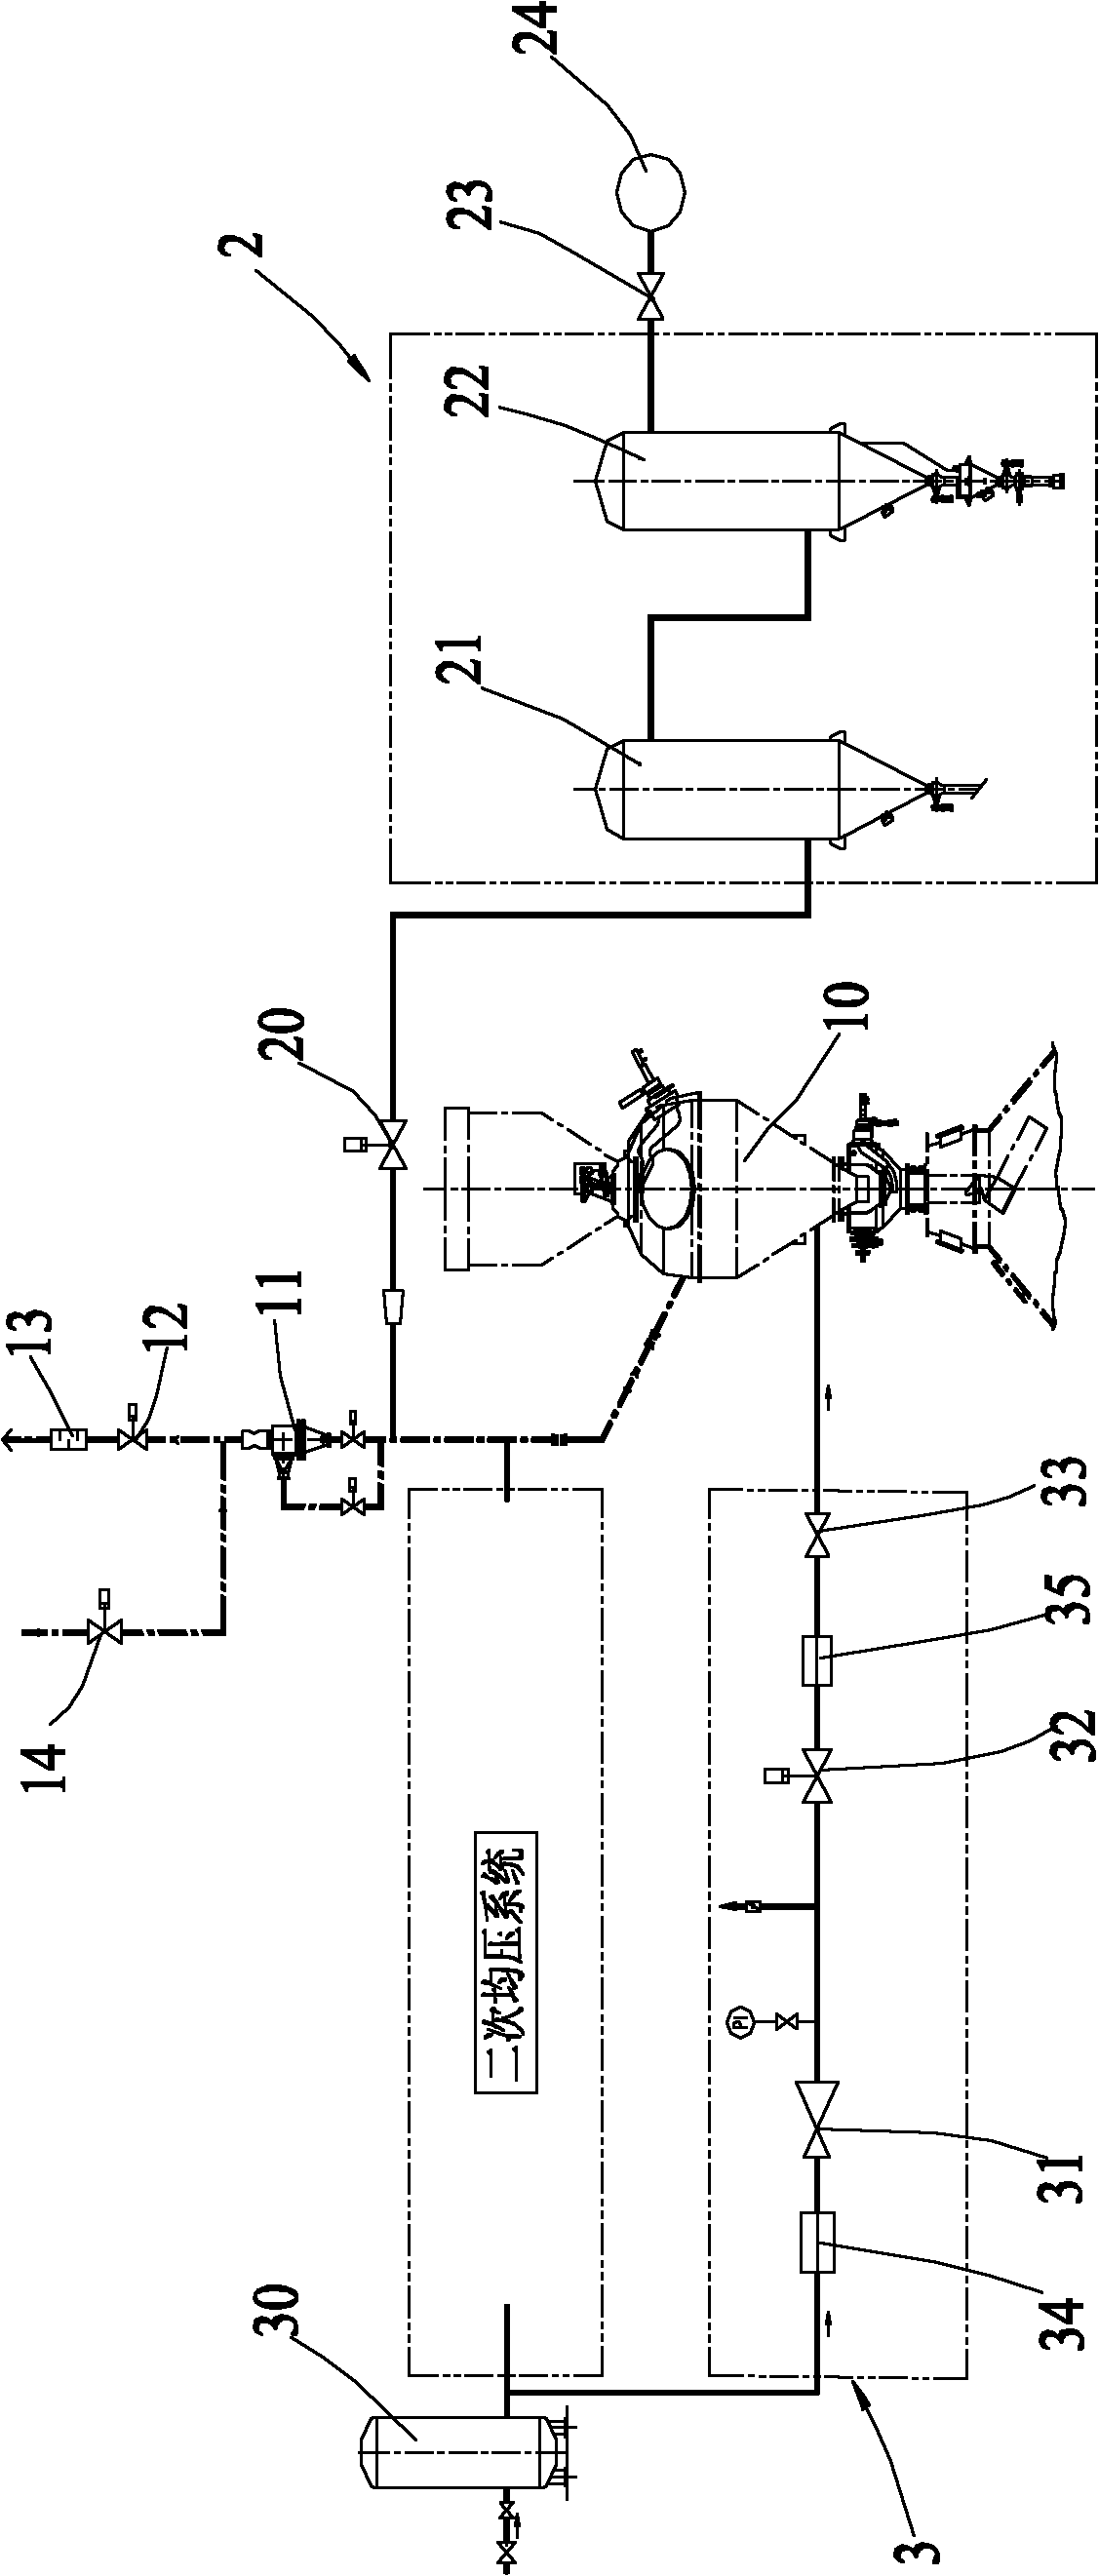 Method and device for recovering pressure-equalized coal gas at top of blast furnace